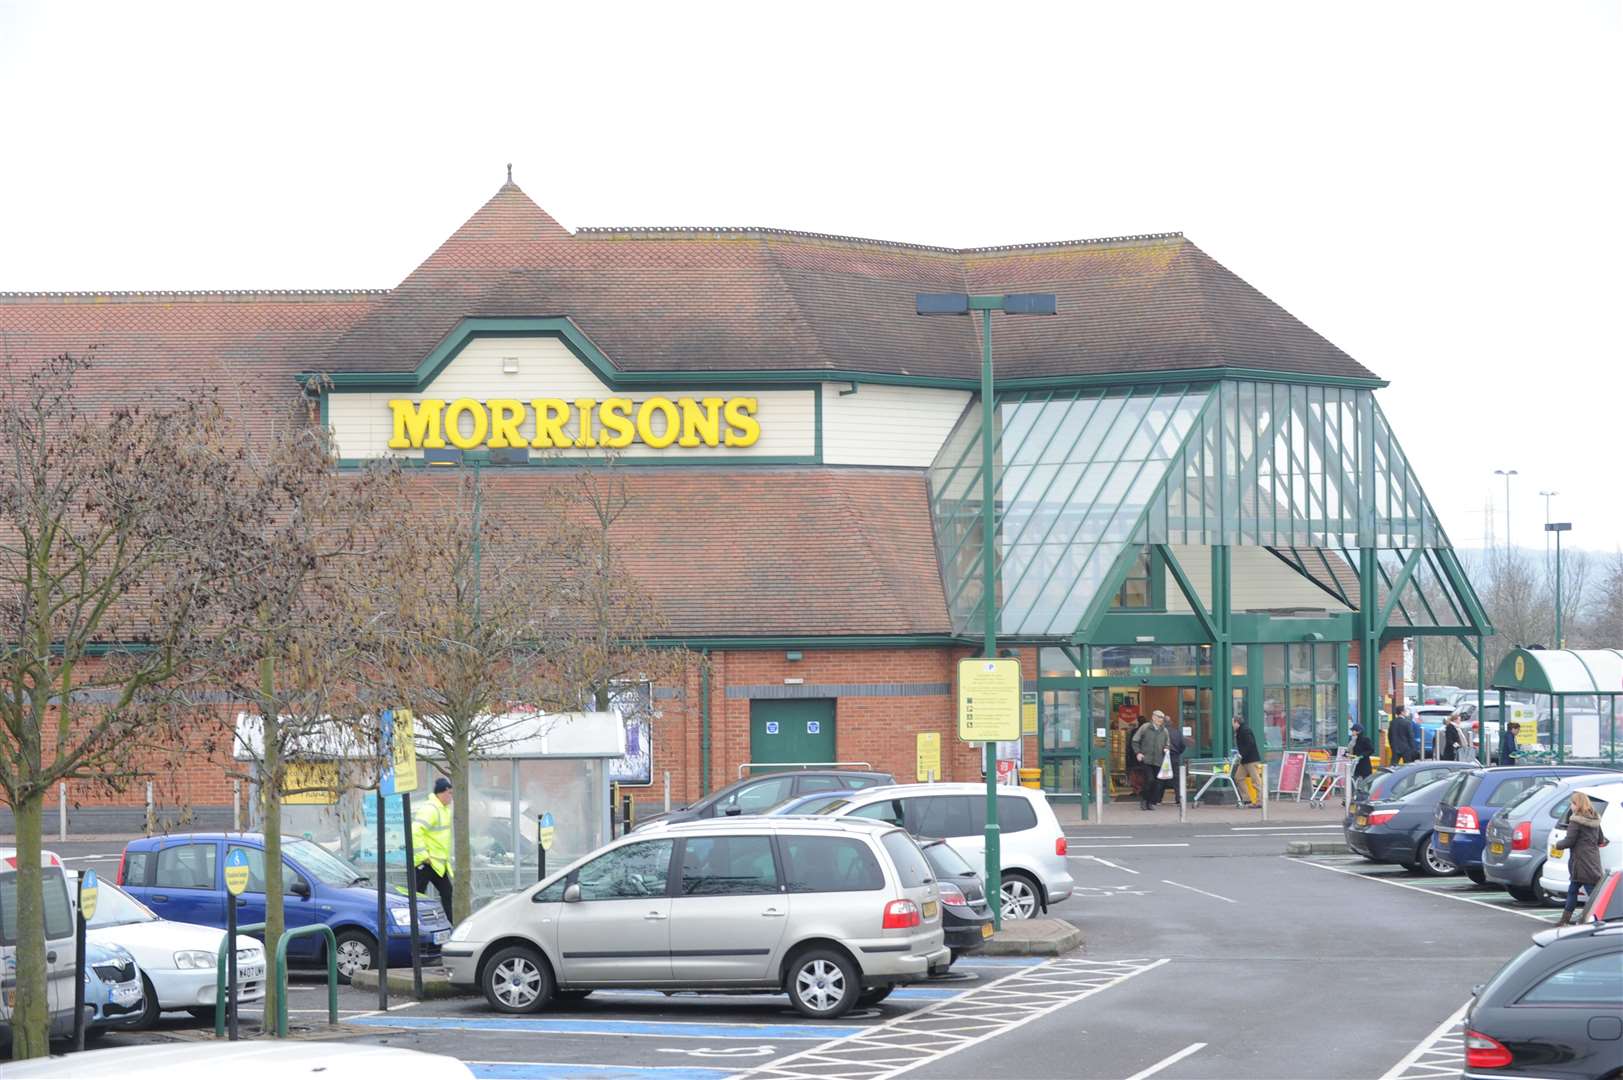 Morrisons opening hours differ depending on the store